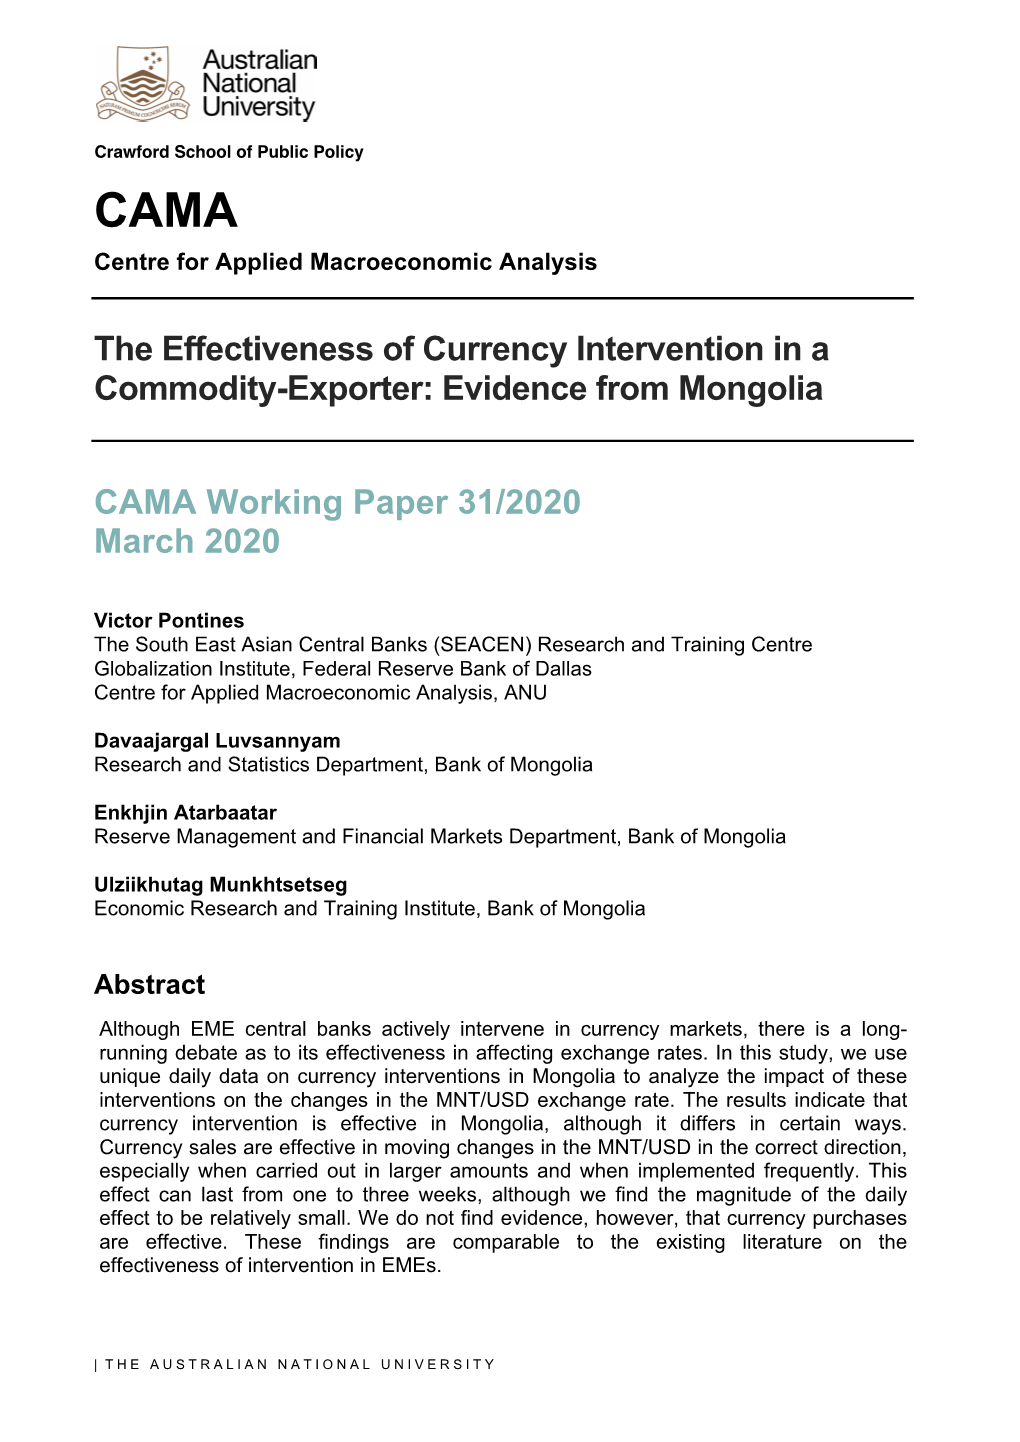 The Effectiveness of Currency Intervention in a Commodity-Exporter: Evidence from Mongolia CAMA Working Paper 31/2020 March 2020